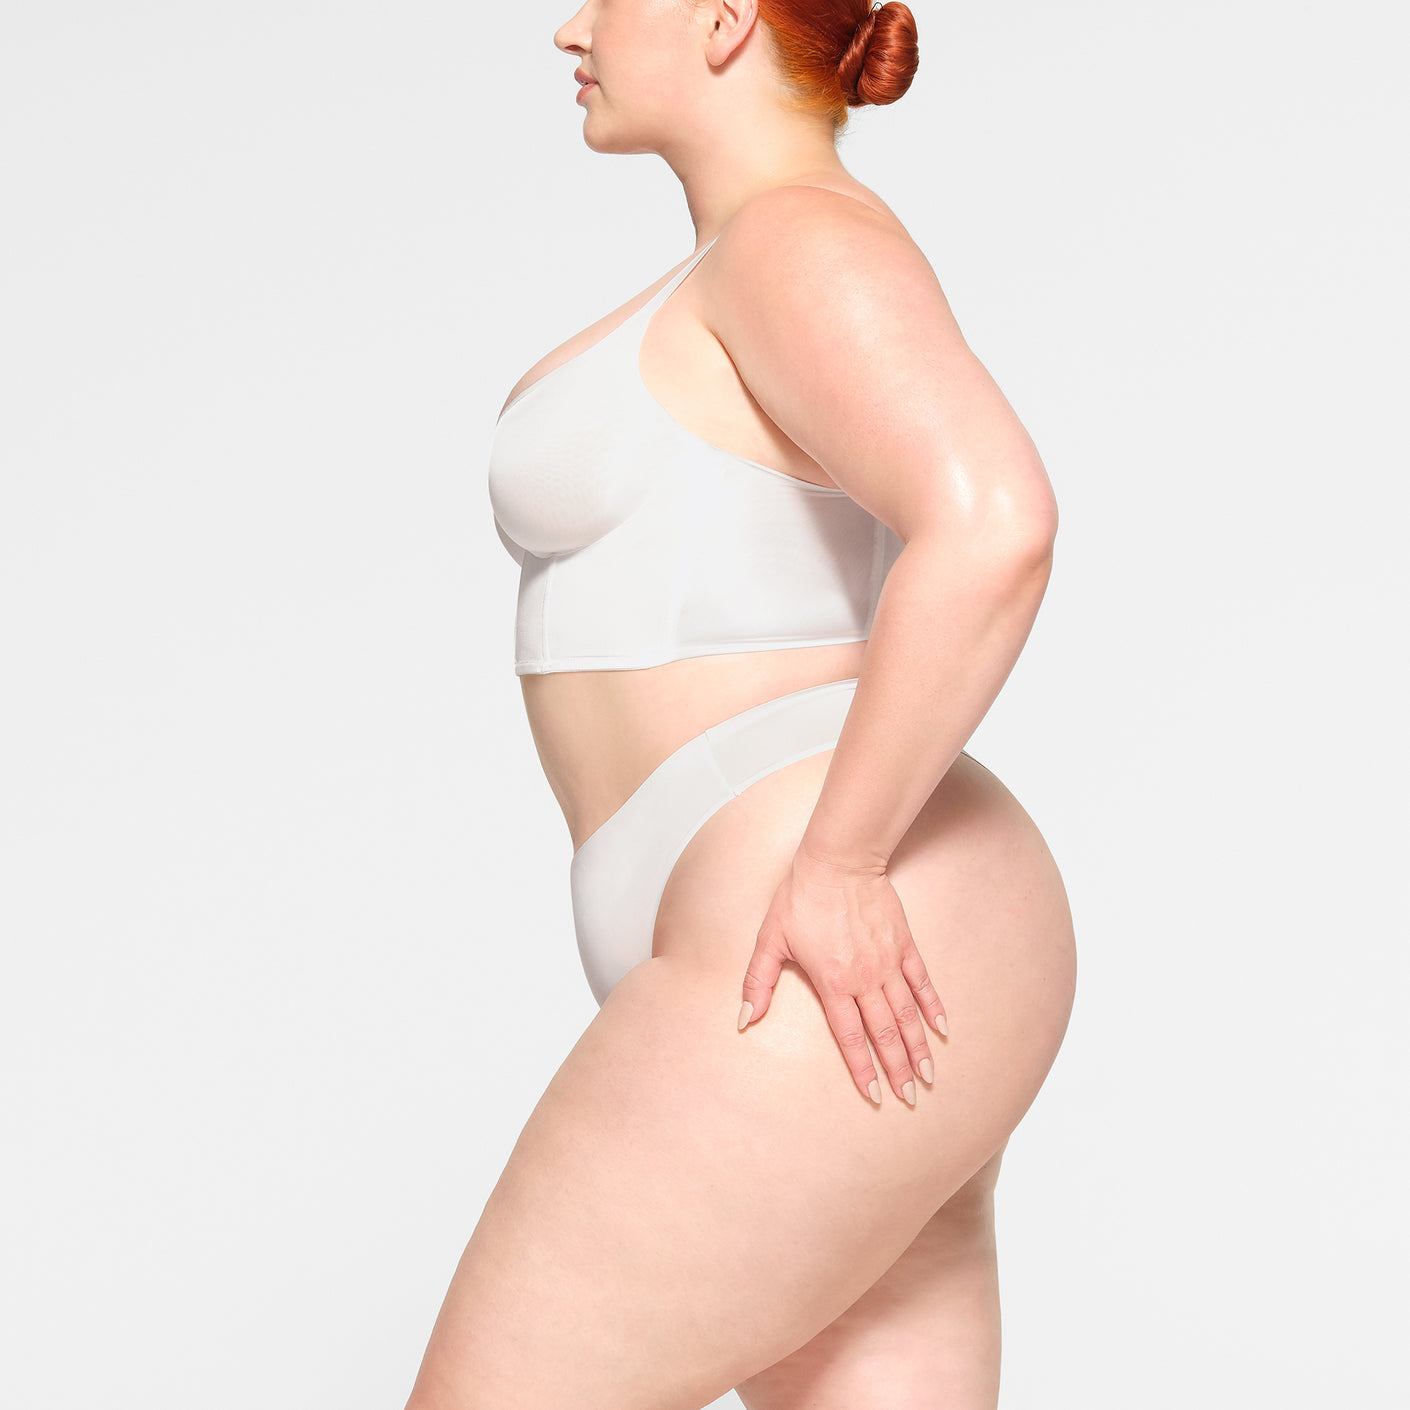 SKIMS PLUS SIZE REVIEW TRYING THEIR LOUNGEWEAR BRAS AND SHAPEWEAR